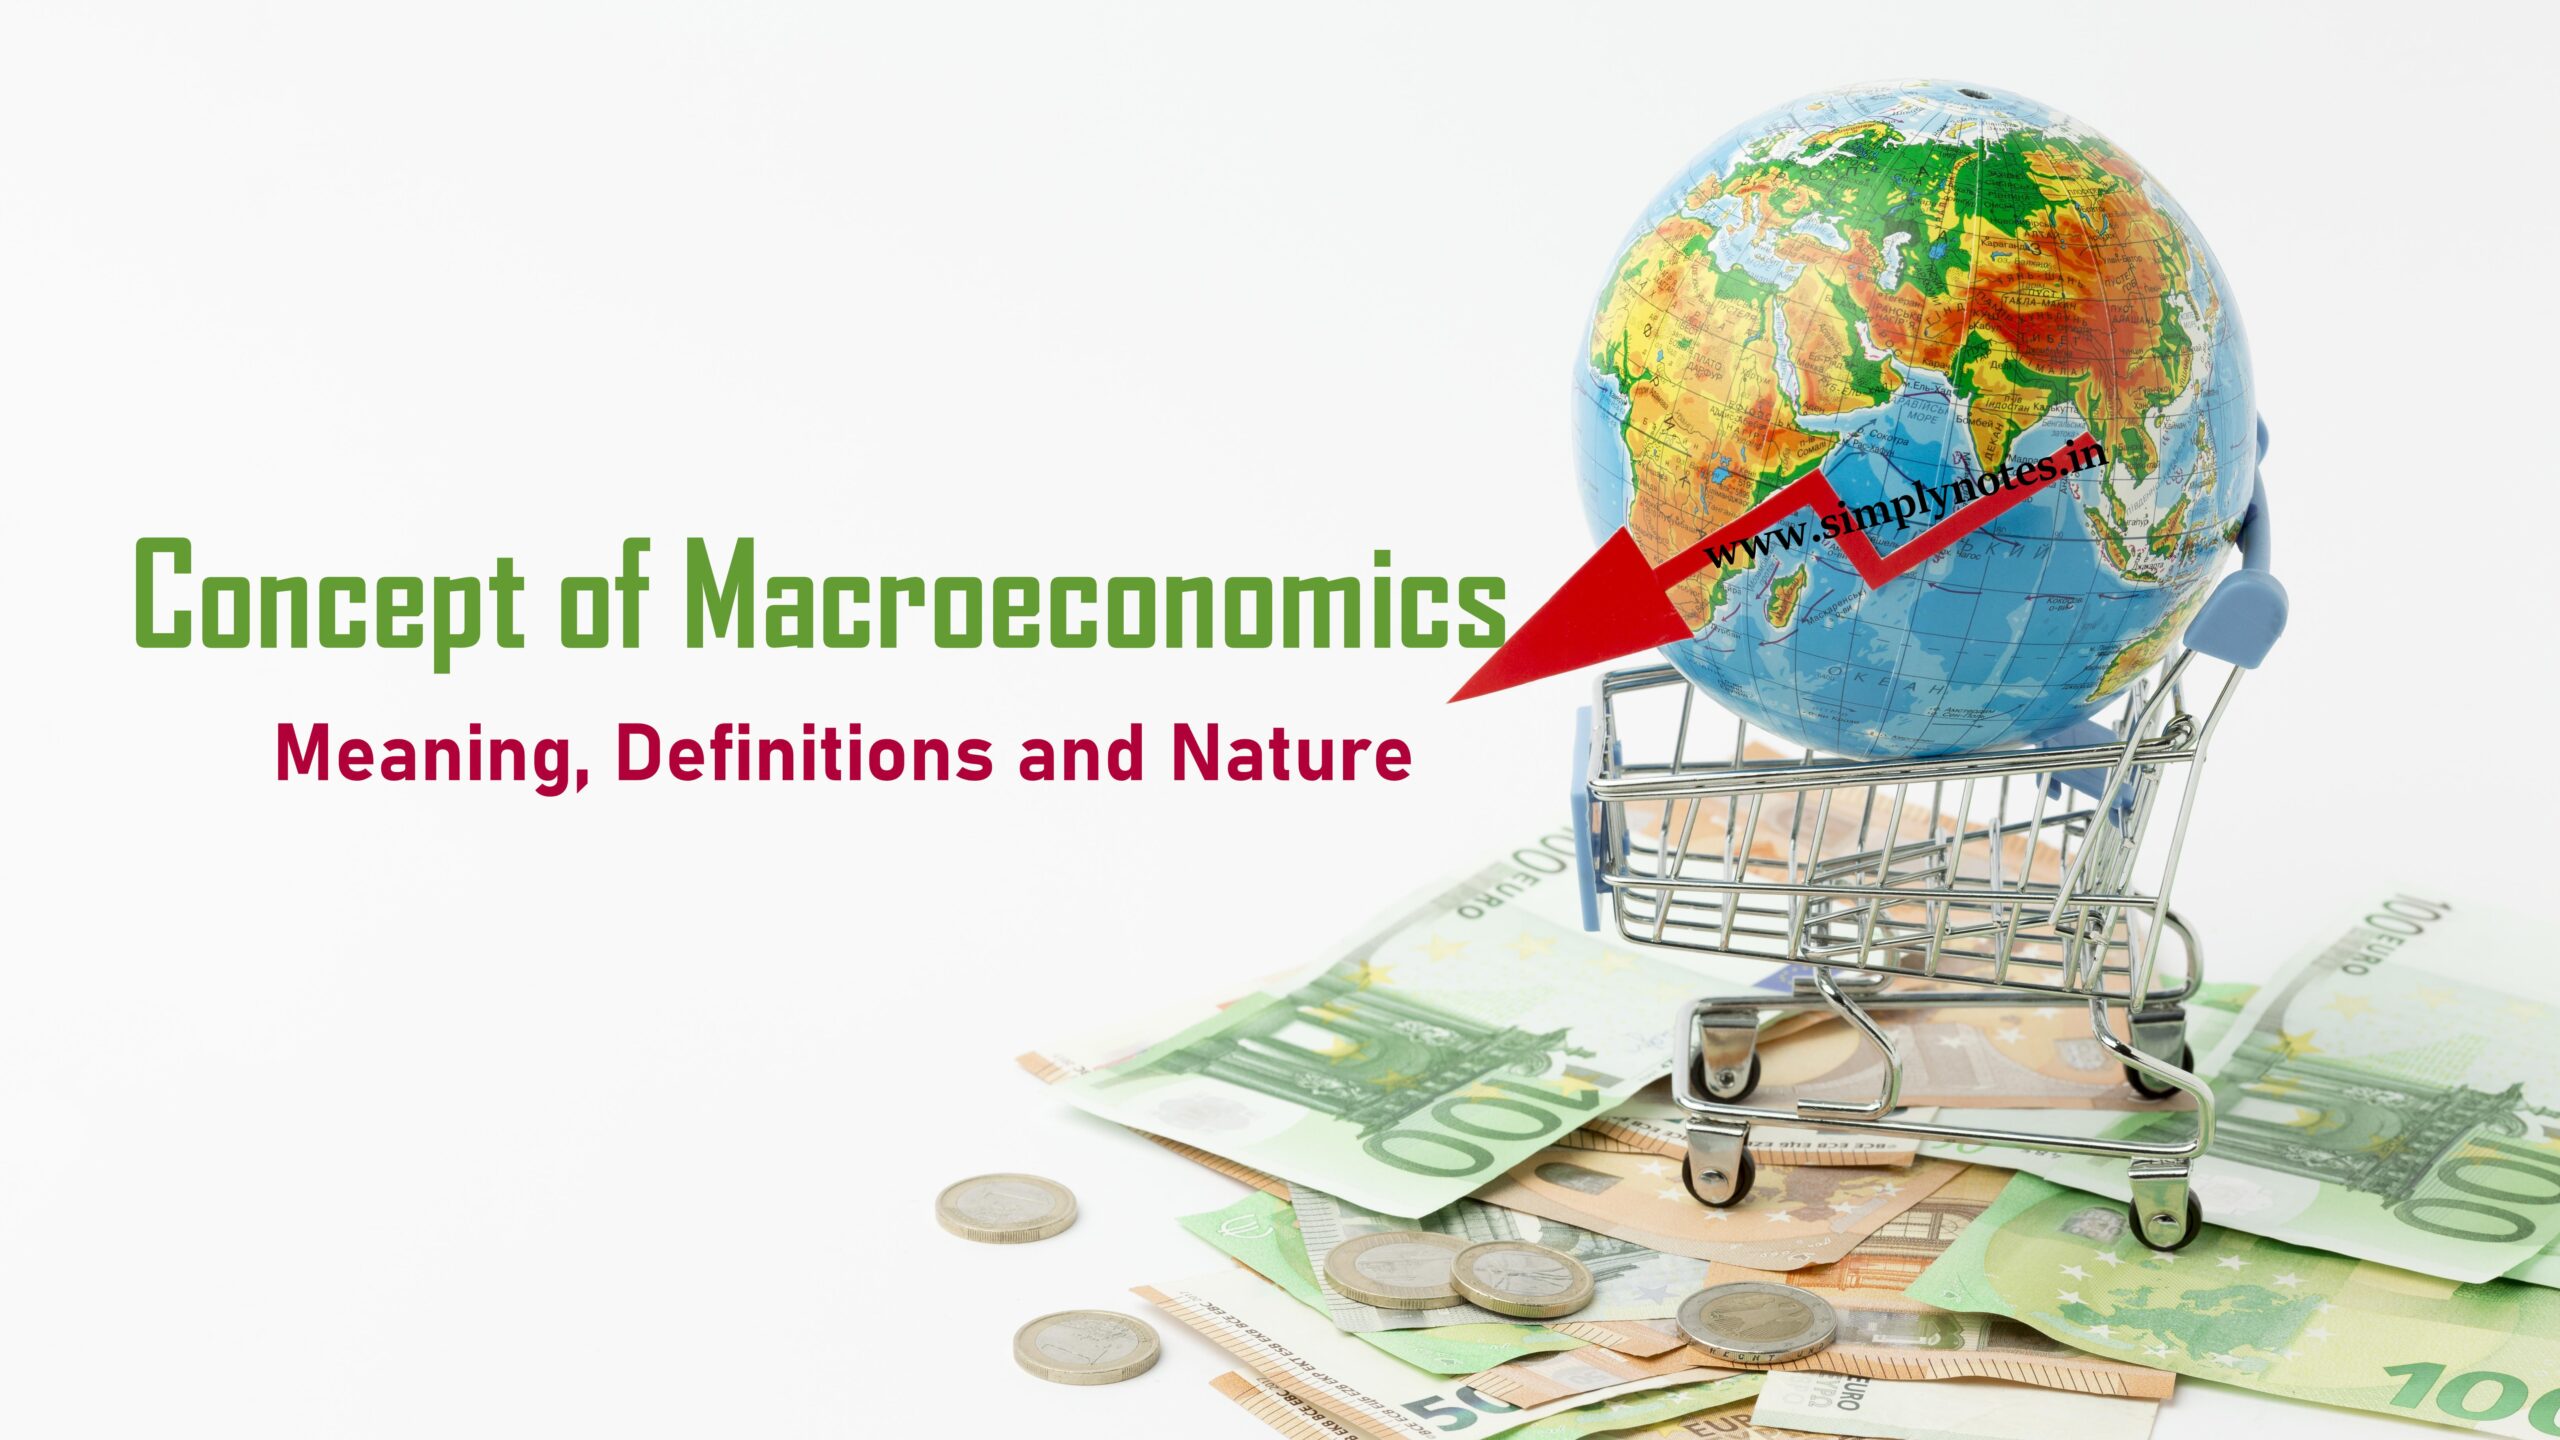 Concept of Macroeconomics – Meaning, Definitions and Nature